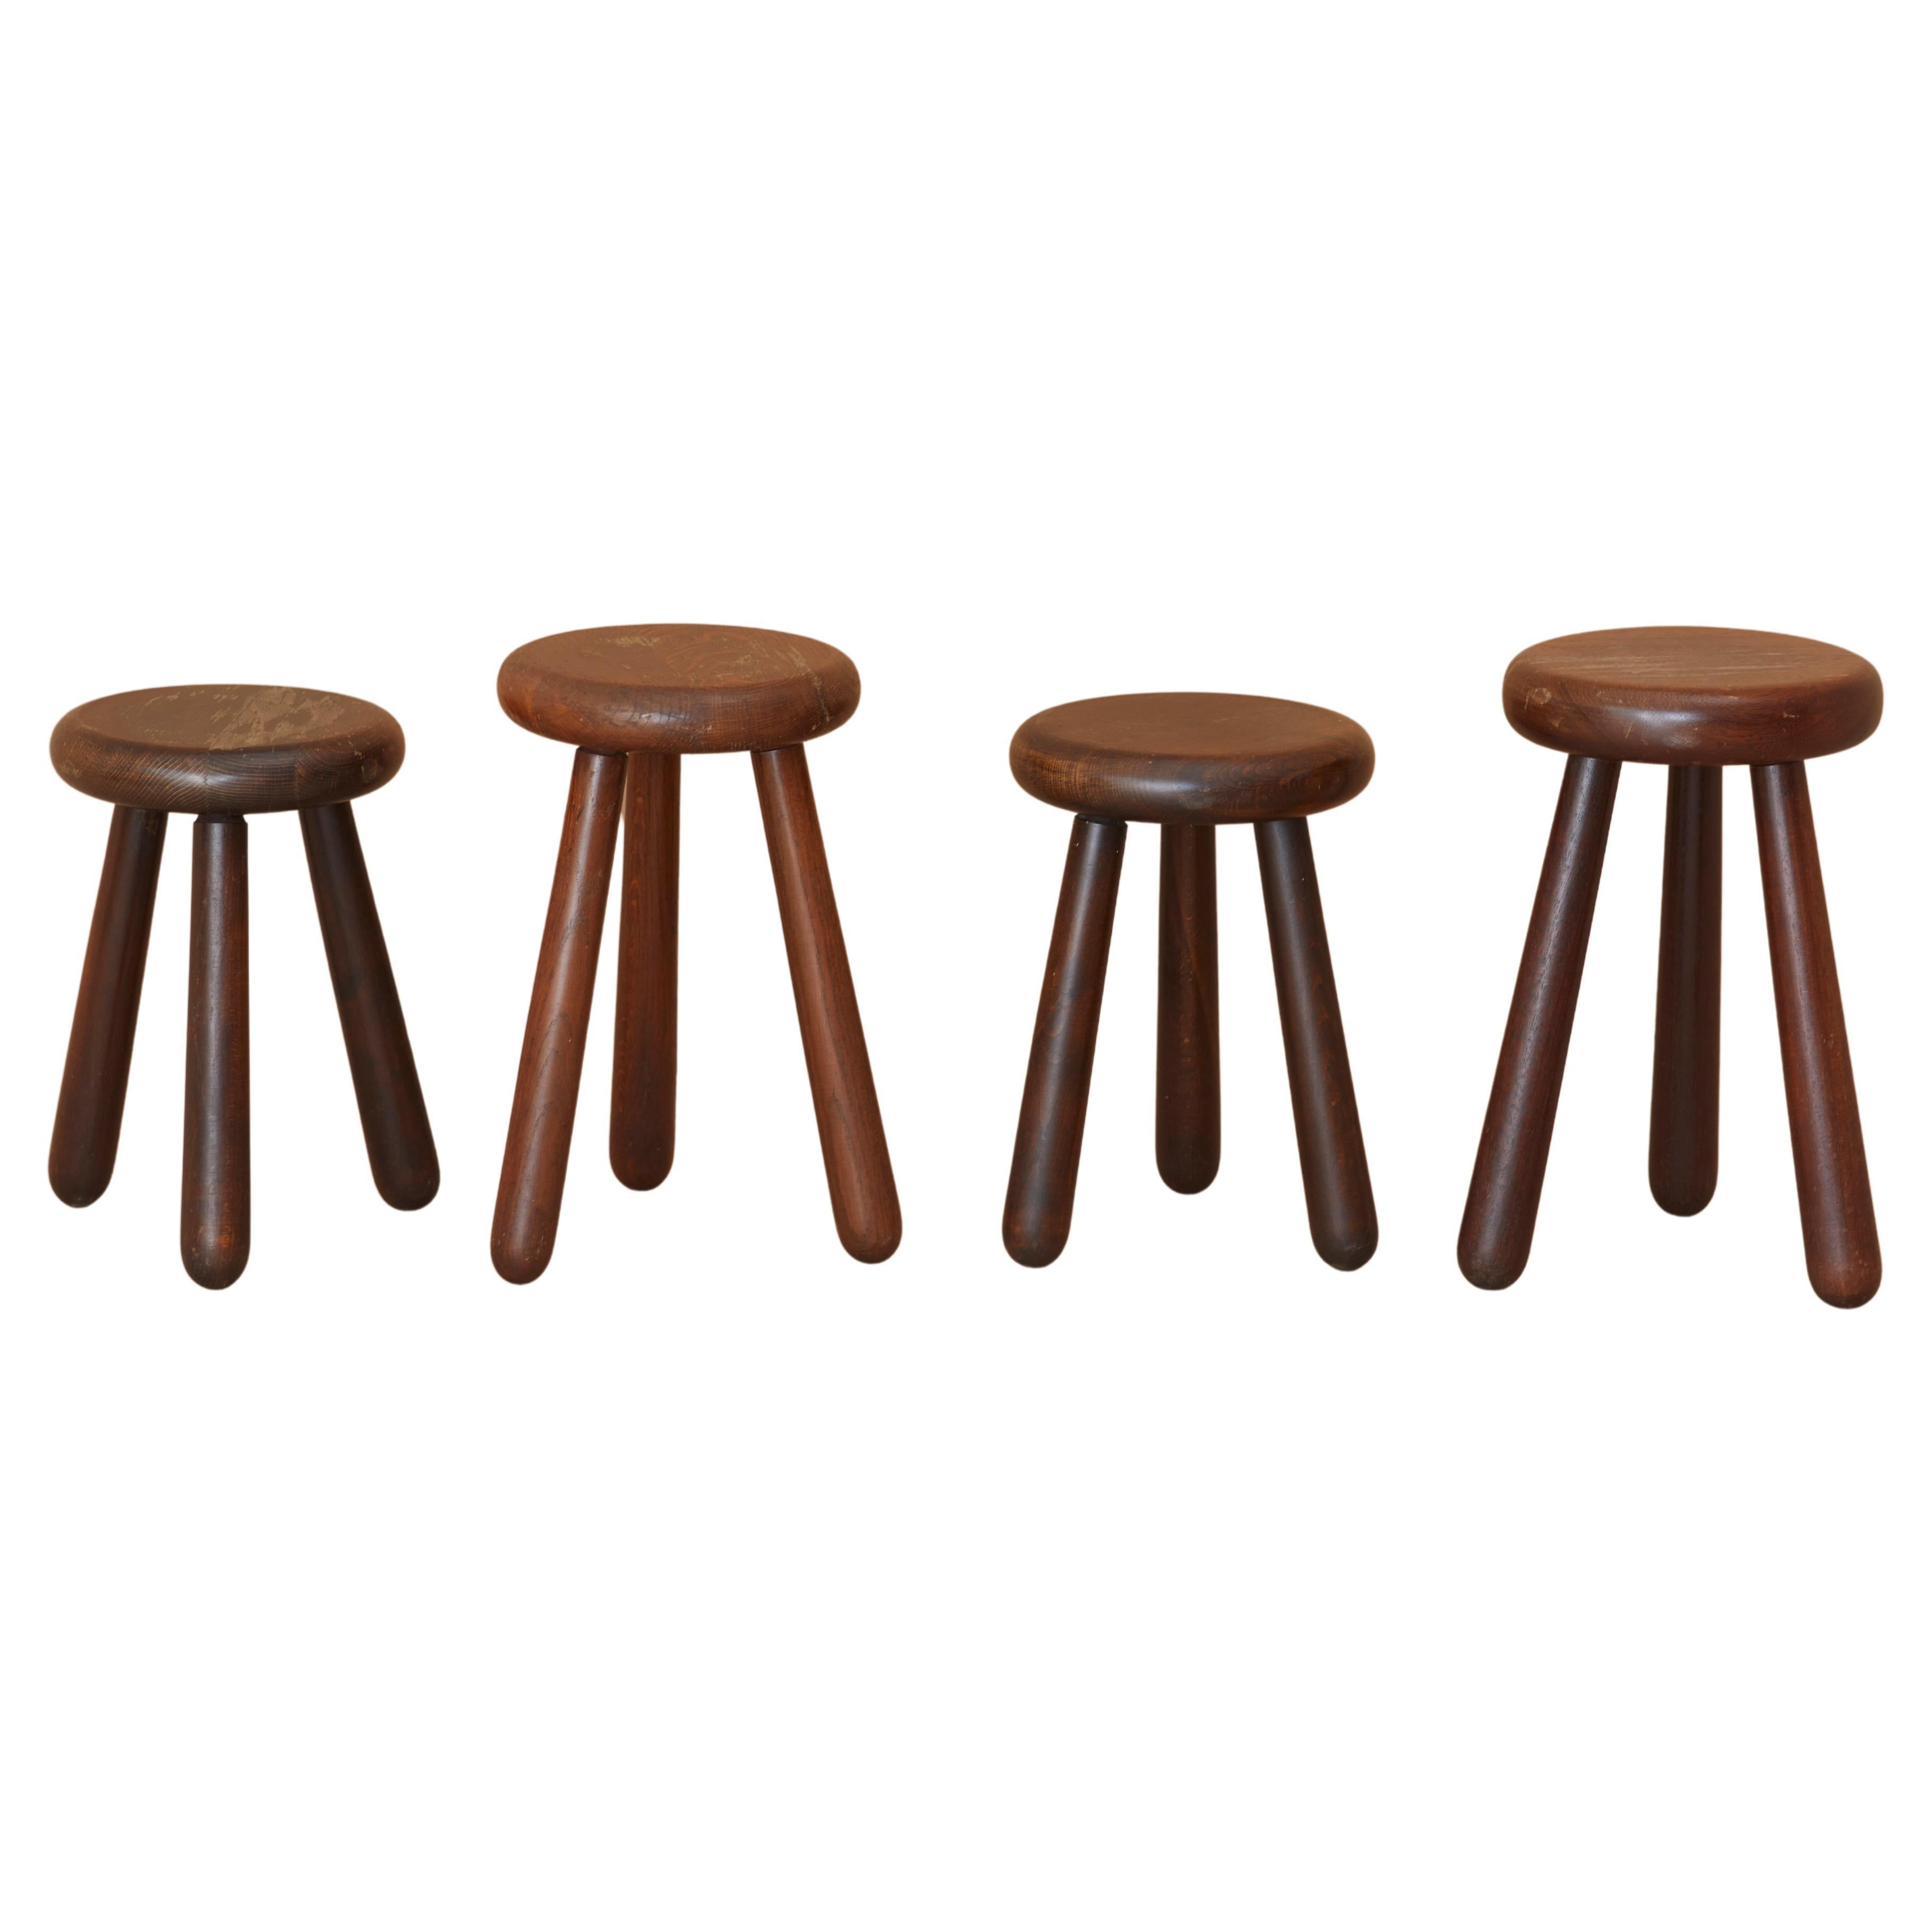 Set of 4 Handcrafted Four Legged Stools in Solid Wood, France, circa 1970s